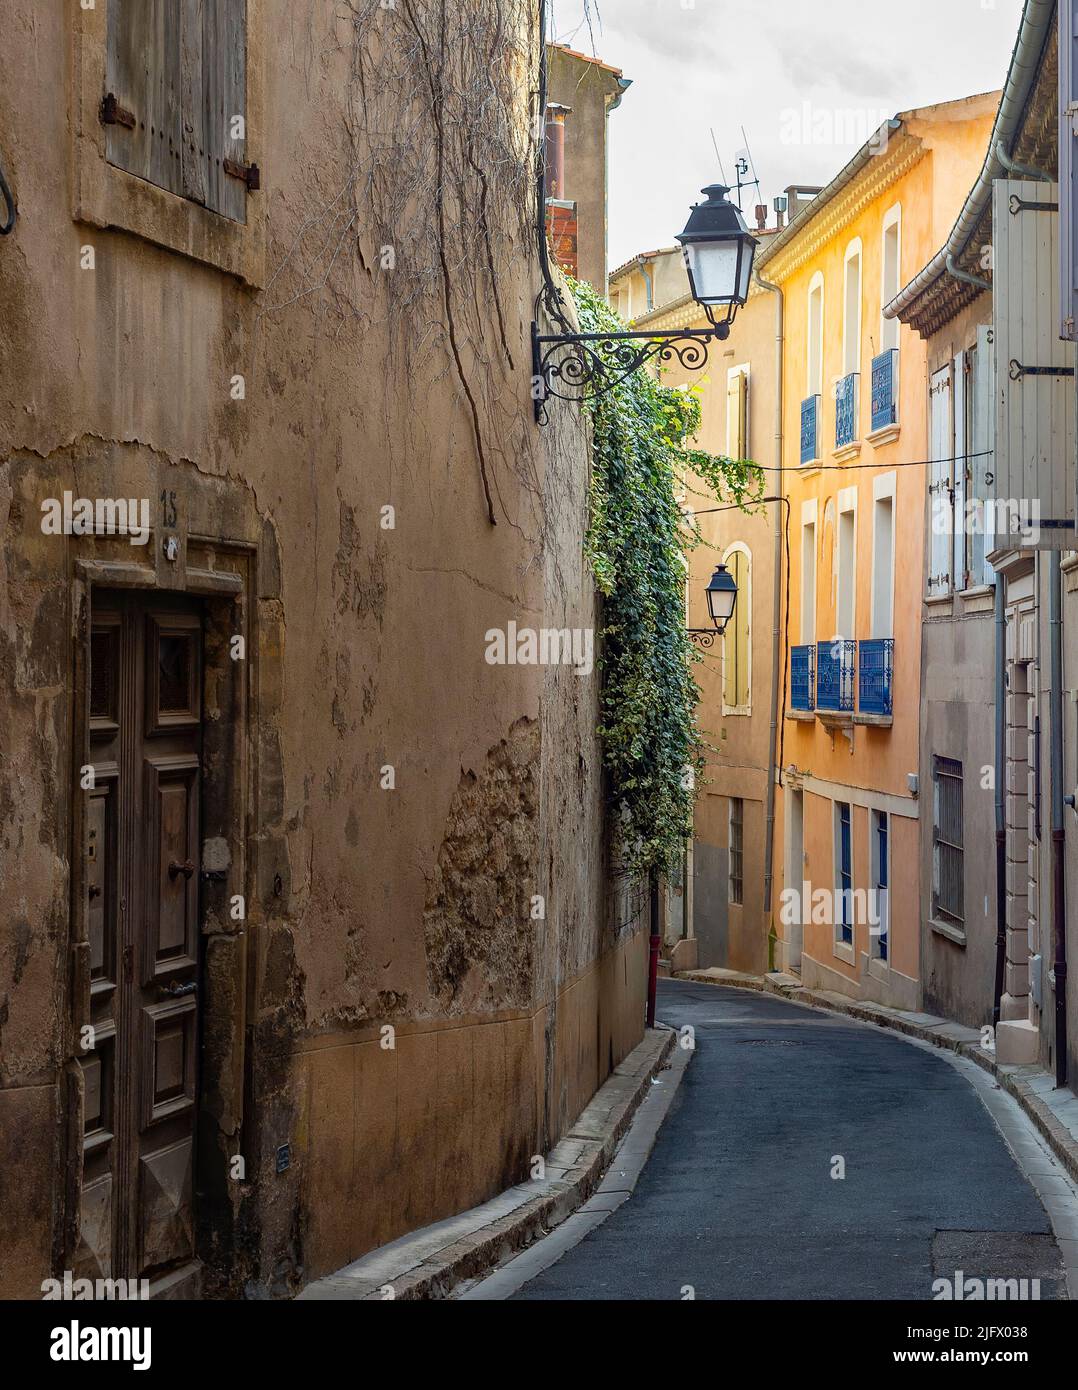 Narrow old town street view. Bеziers, France Stock Photo